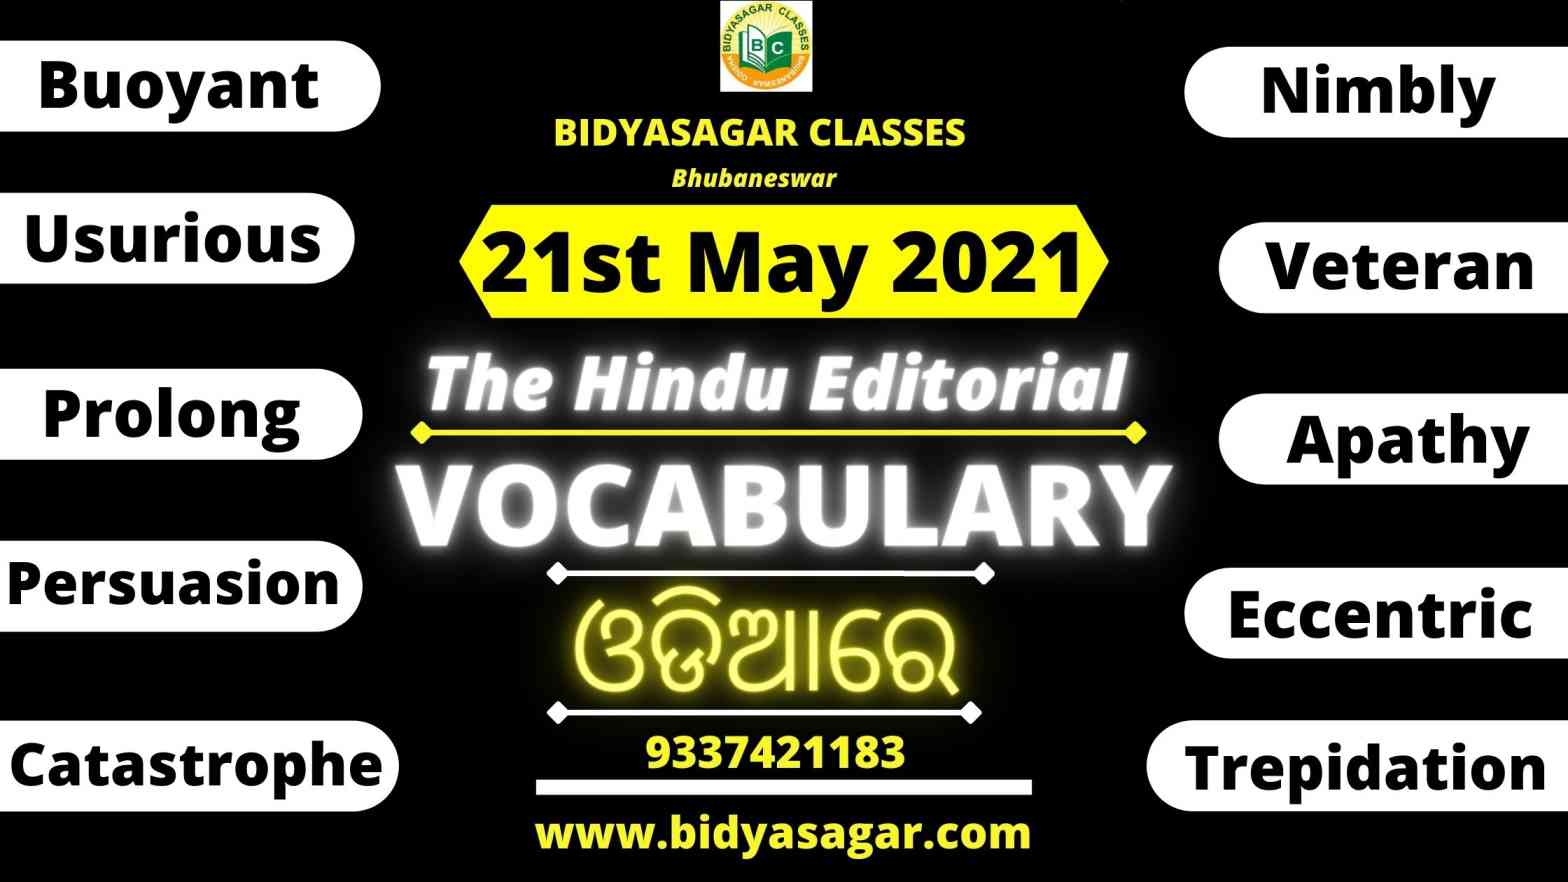 The Hindu Editorial Vocabulary of 21st May 2021